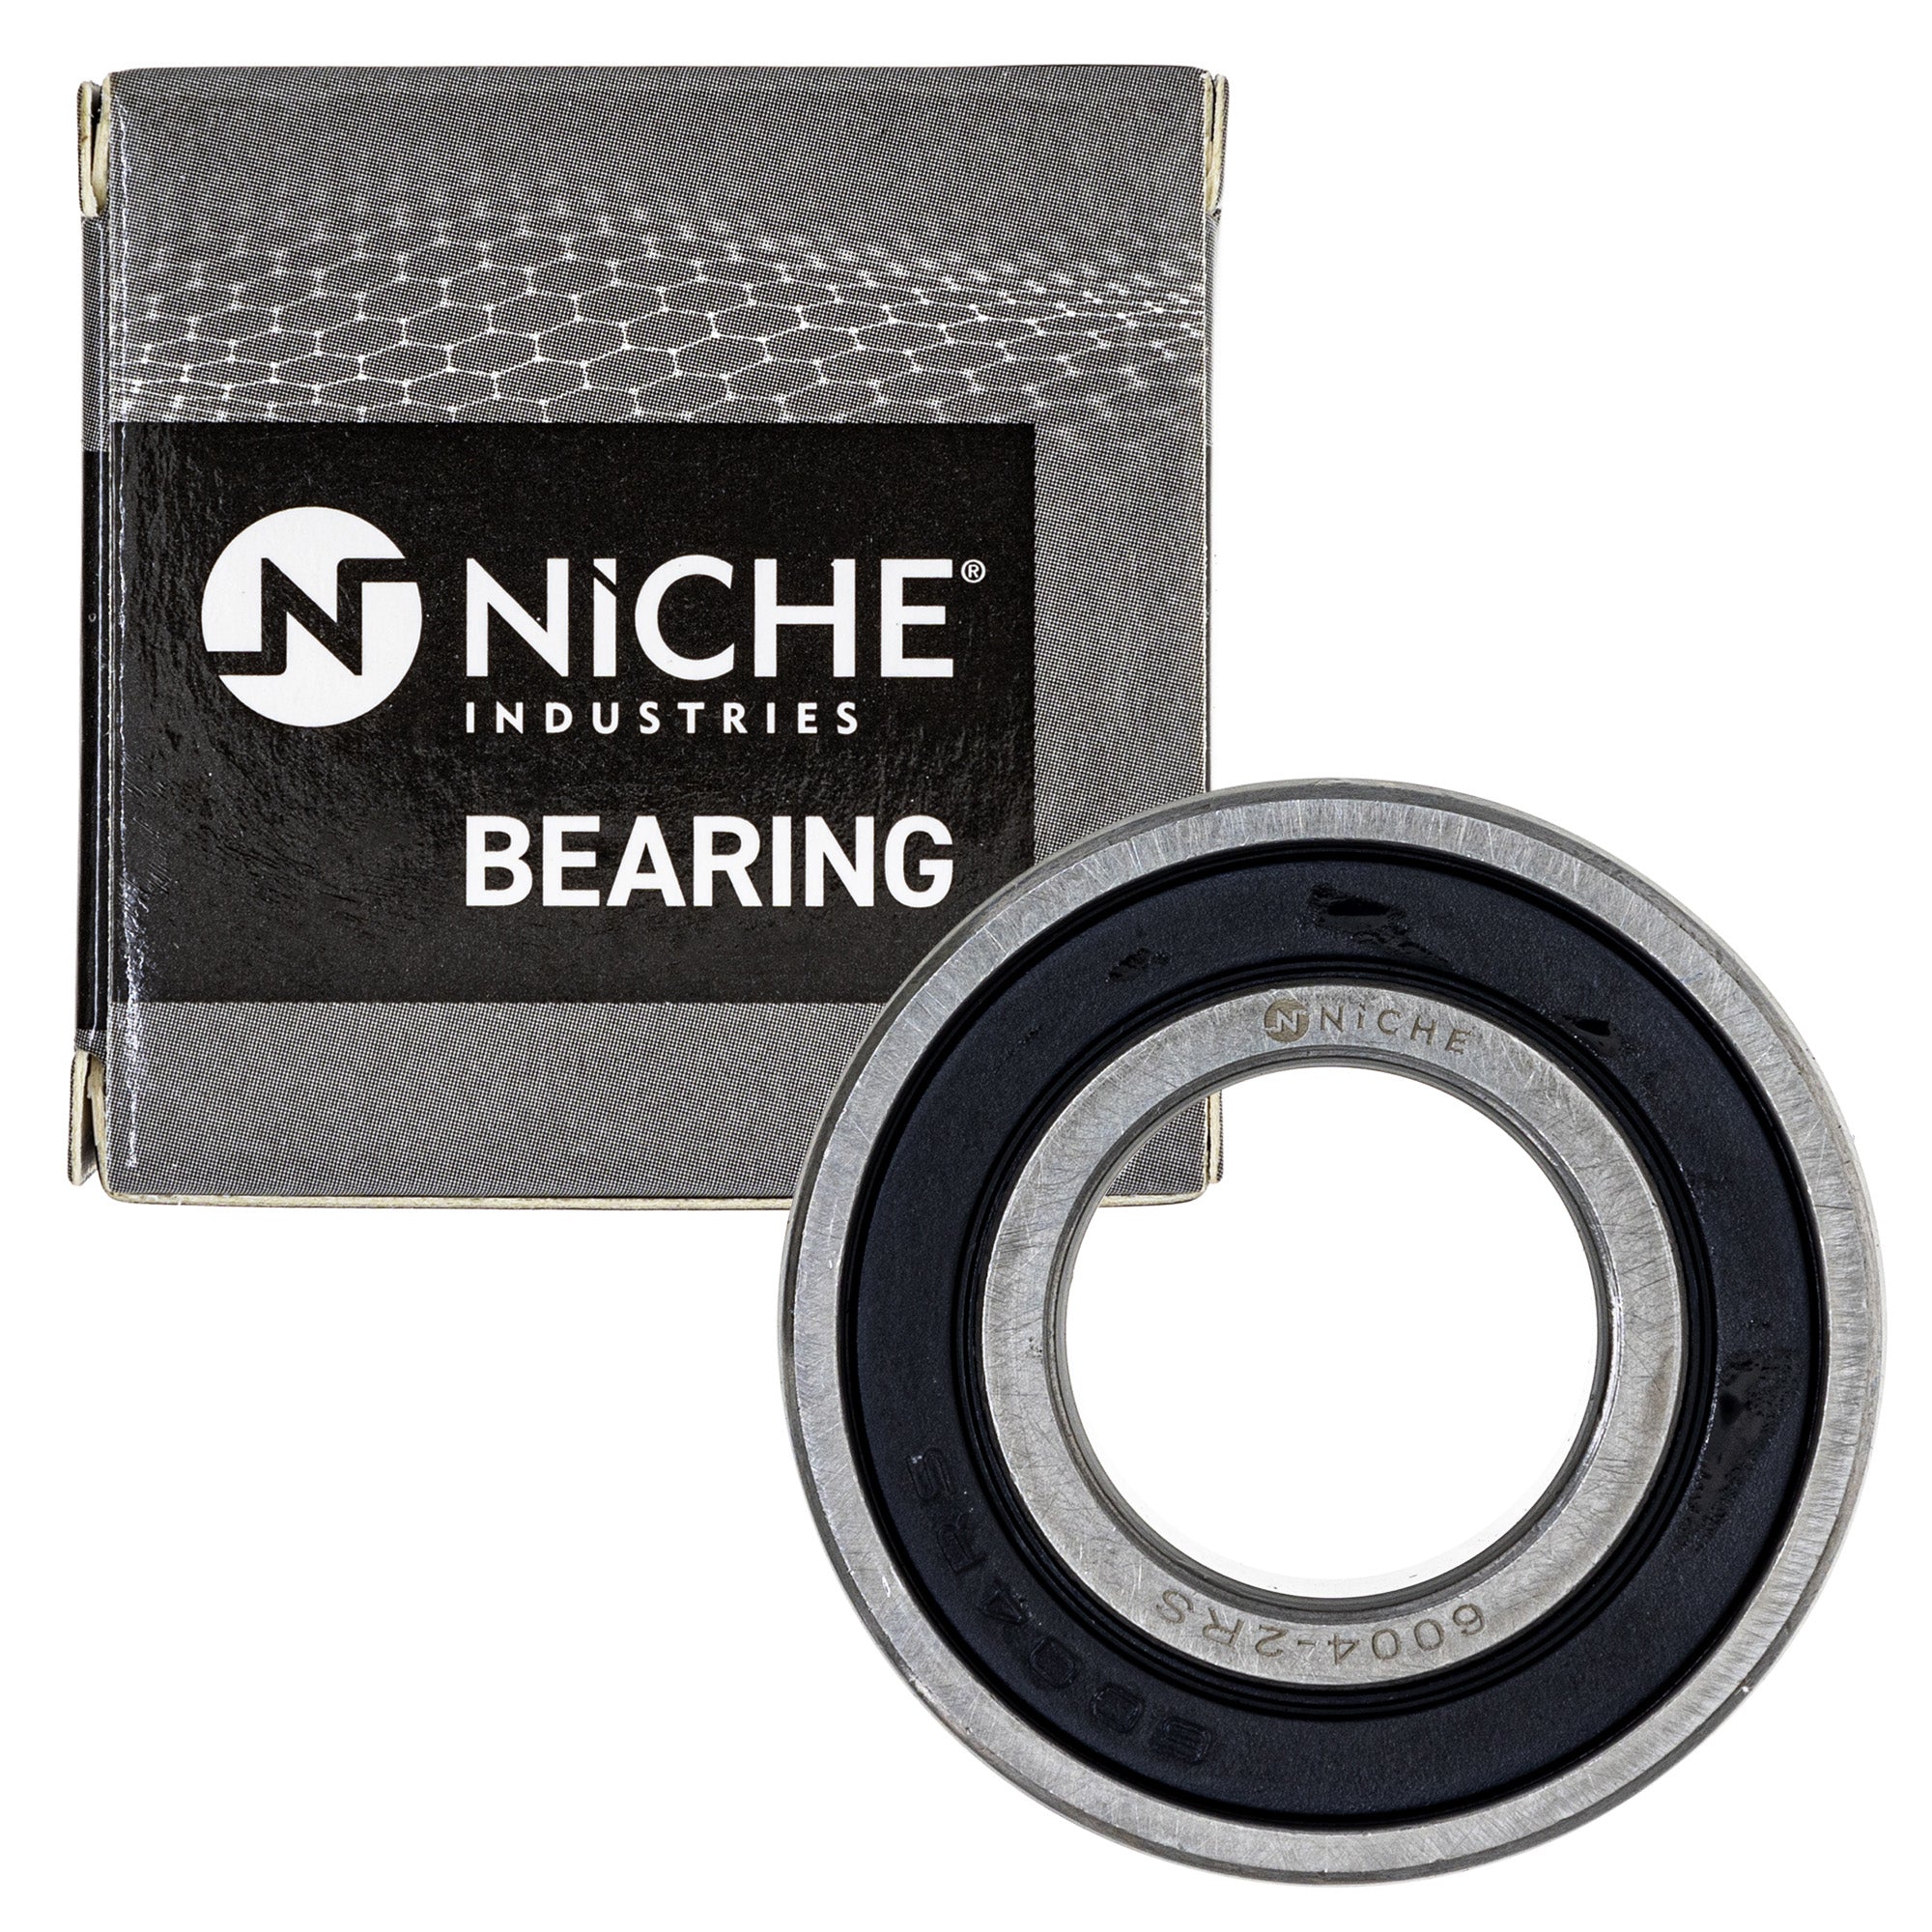 NICHE MK1009159 Wheel Bearing Seal Kit for zOTHER Ref No Z900RS